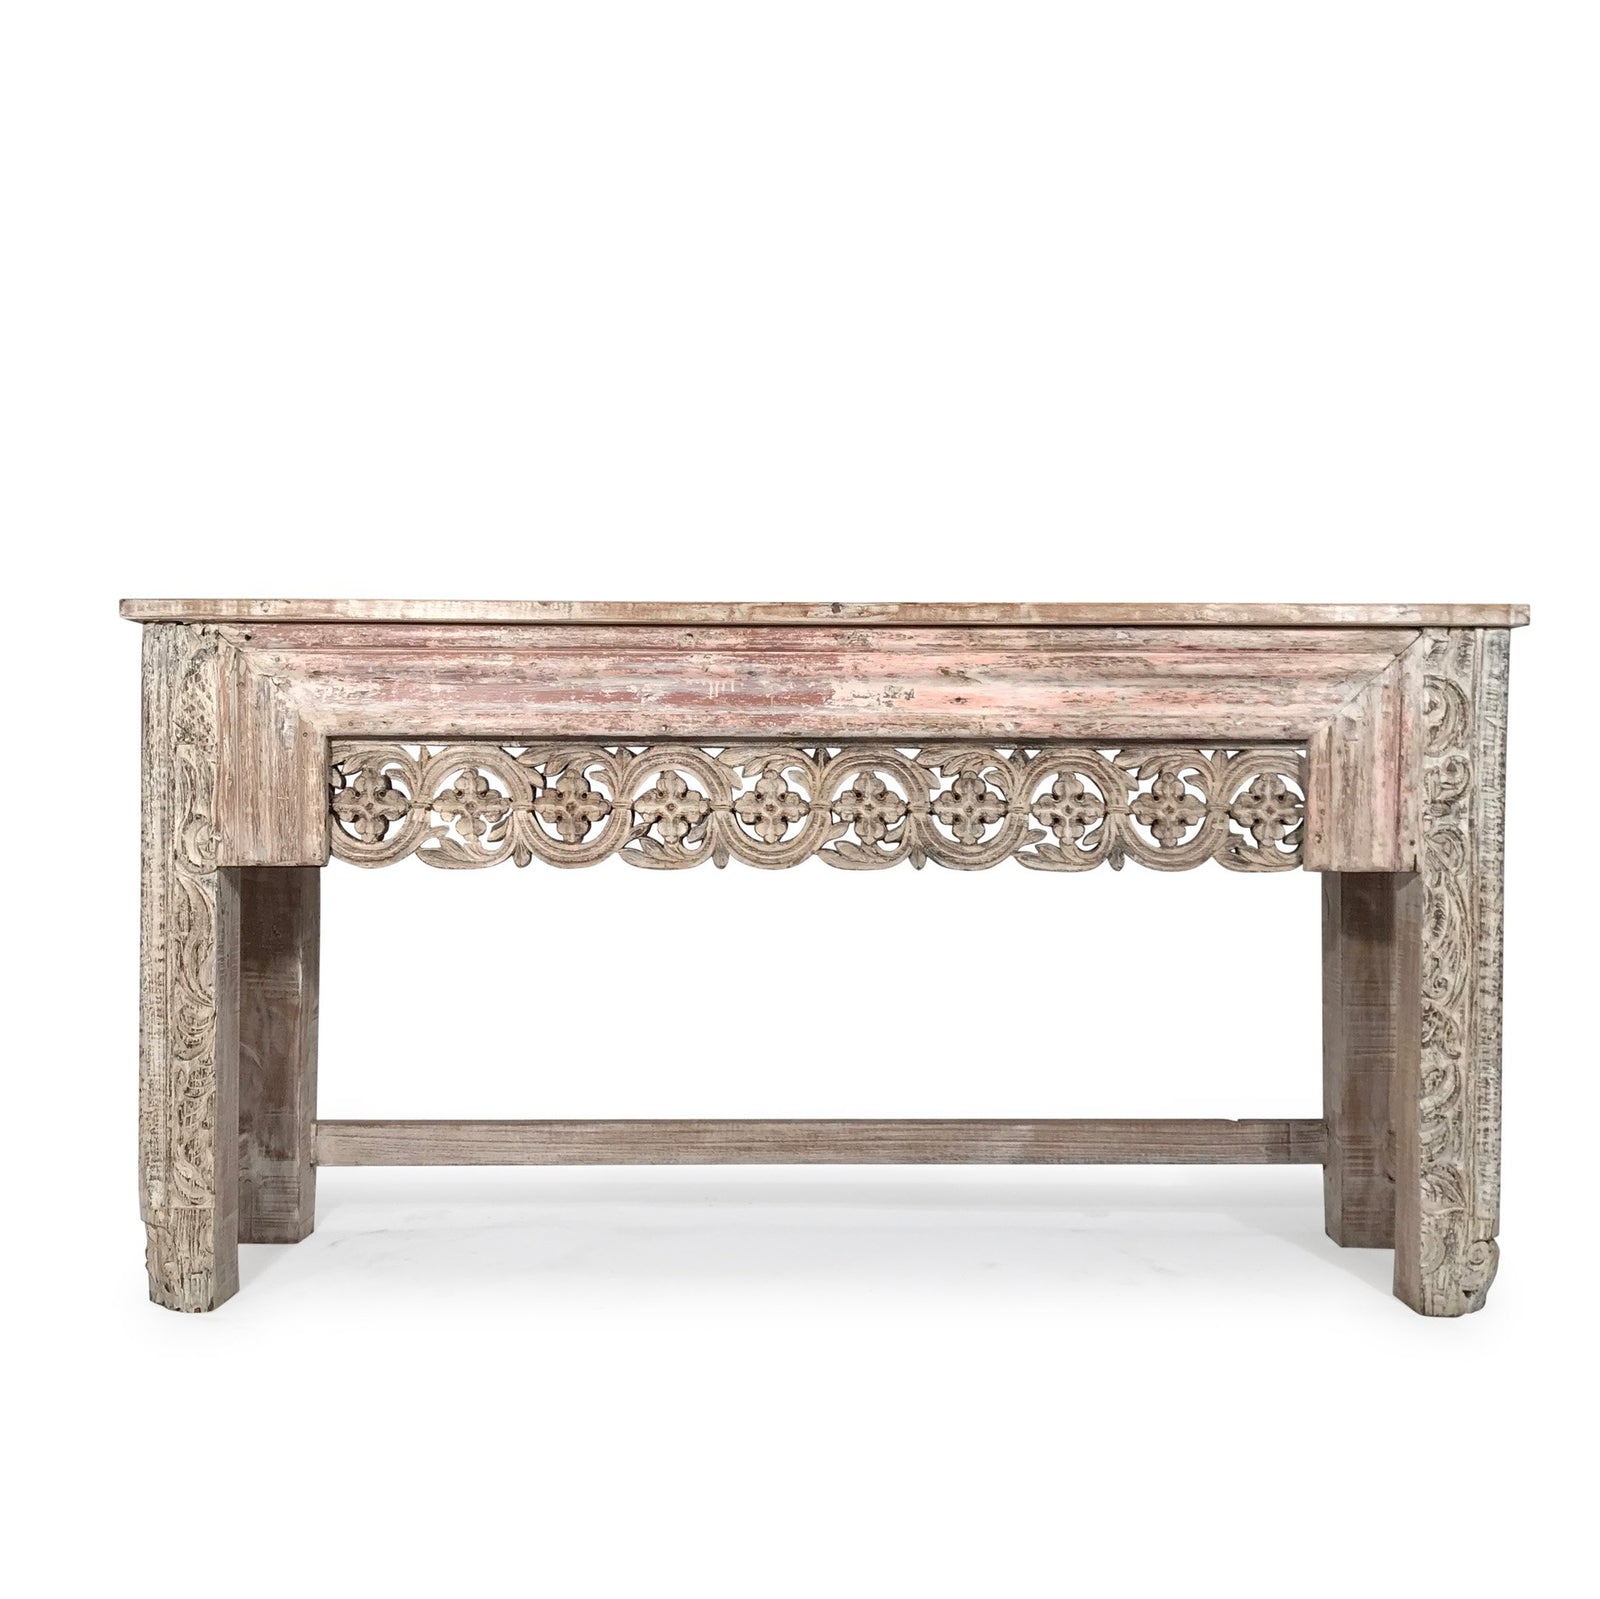 Reclaimed Teakwood Console Table With Painted Finish - 170 x 46 x 87 (wxdxh cms) - A5827